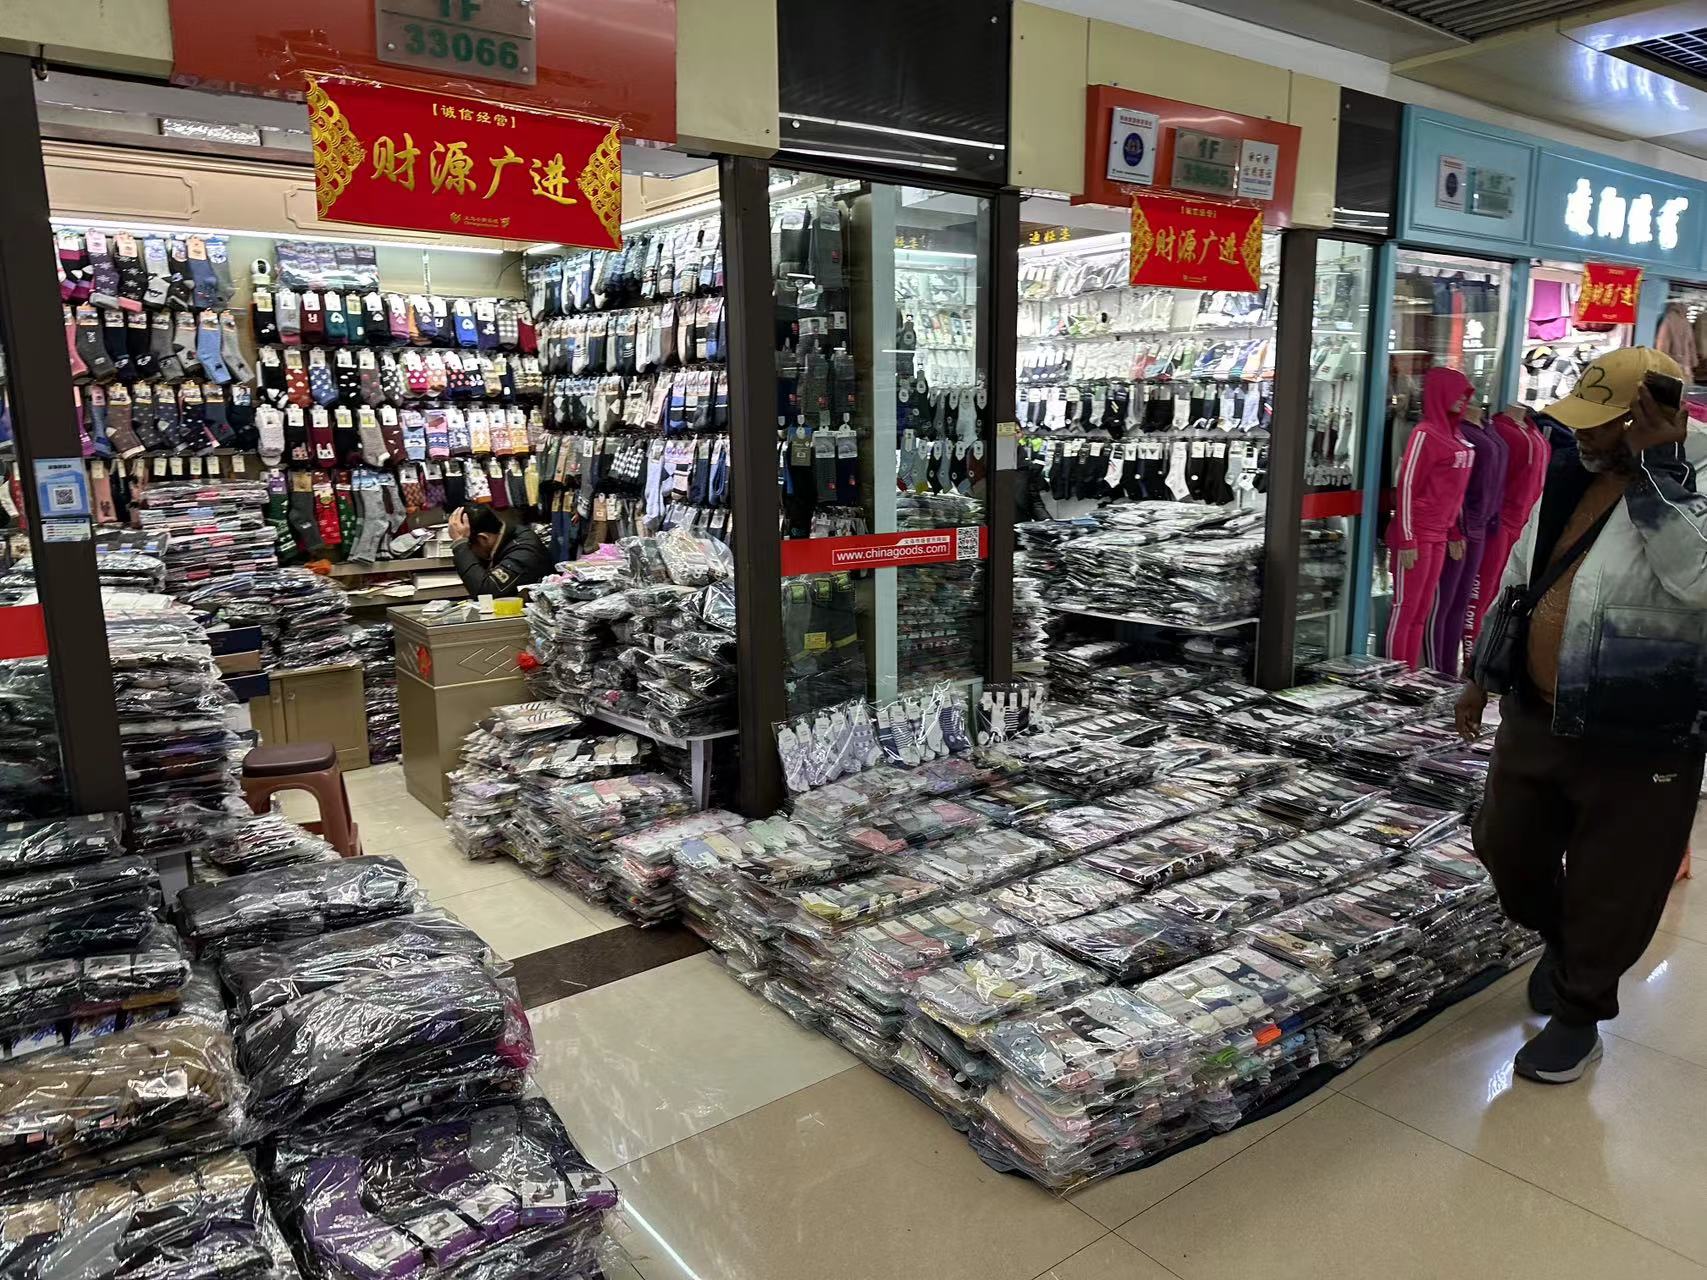 shops_in_yiwu_socks_market_with_inventory_stock